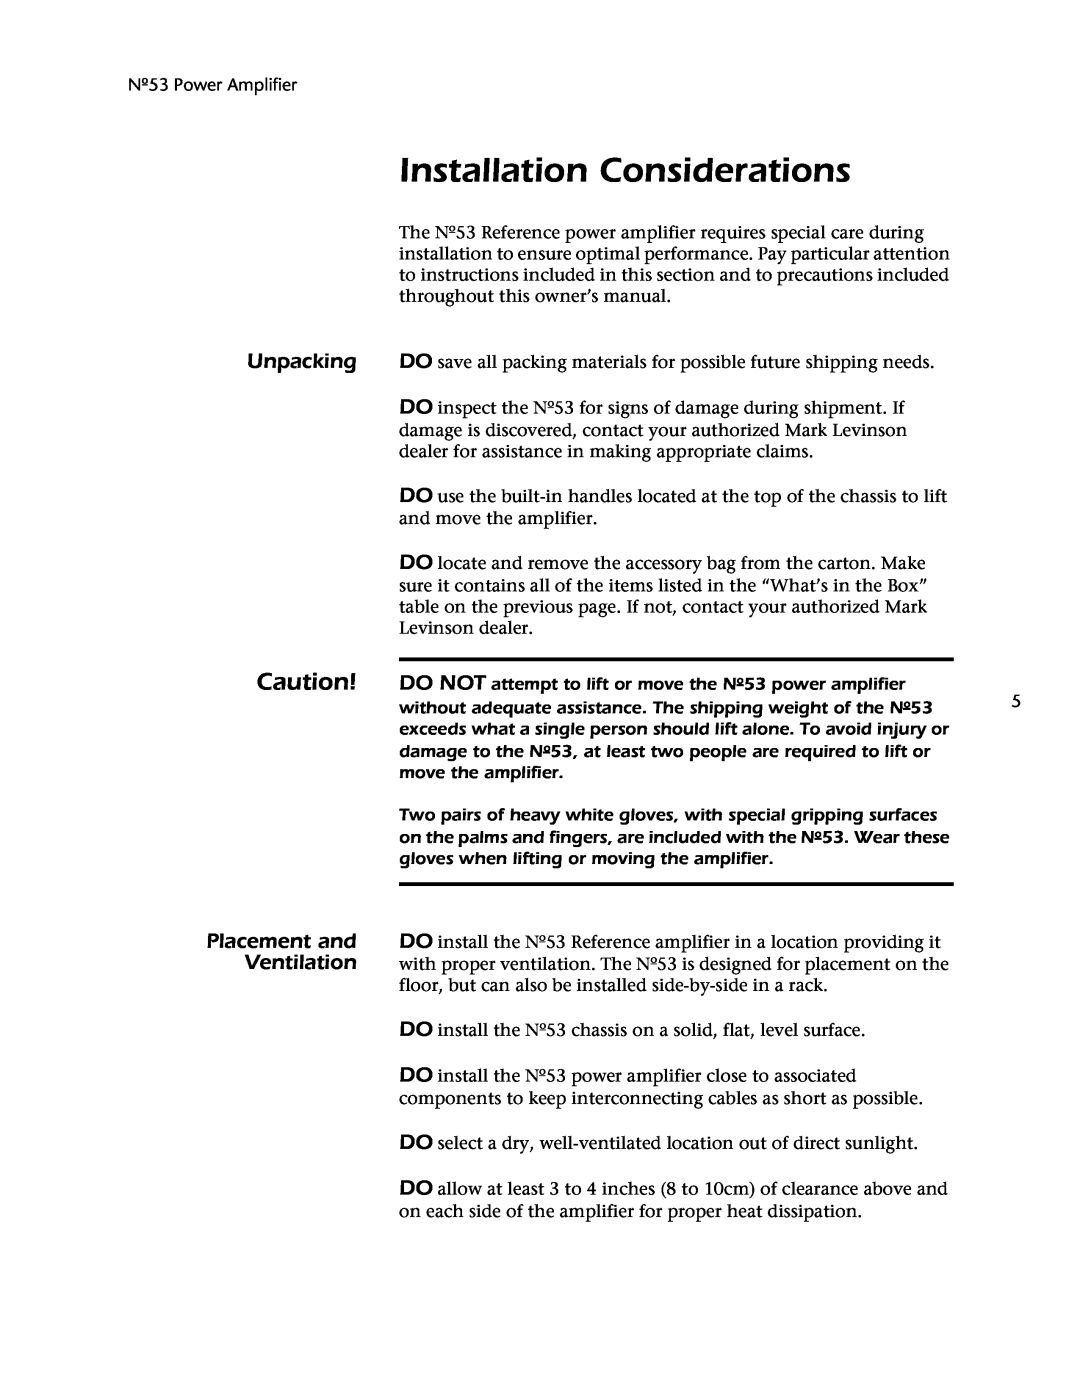 Mark Levinson 53 owner manual Installation Considerations, Unpacking, Placement and, Ventilation 